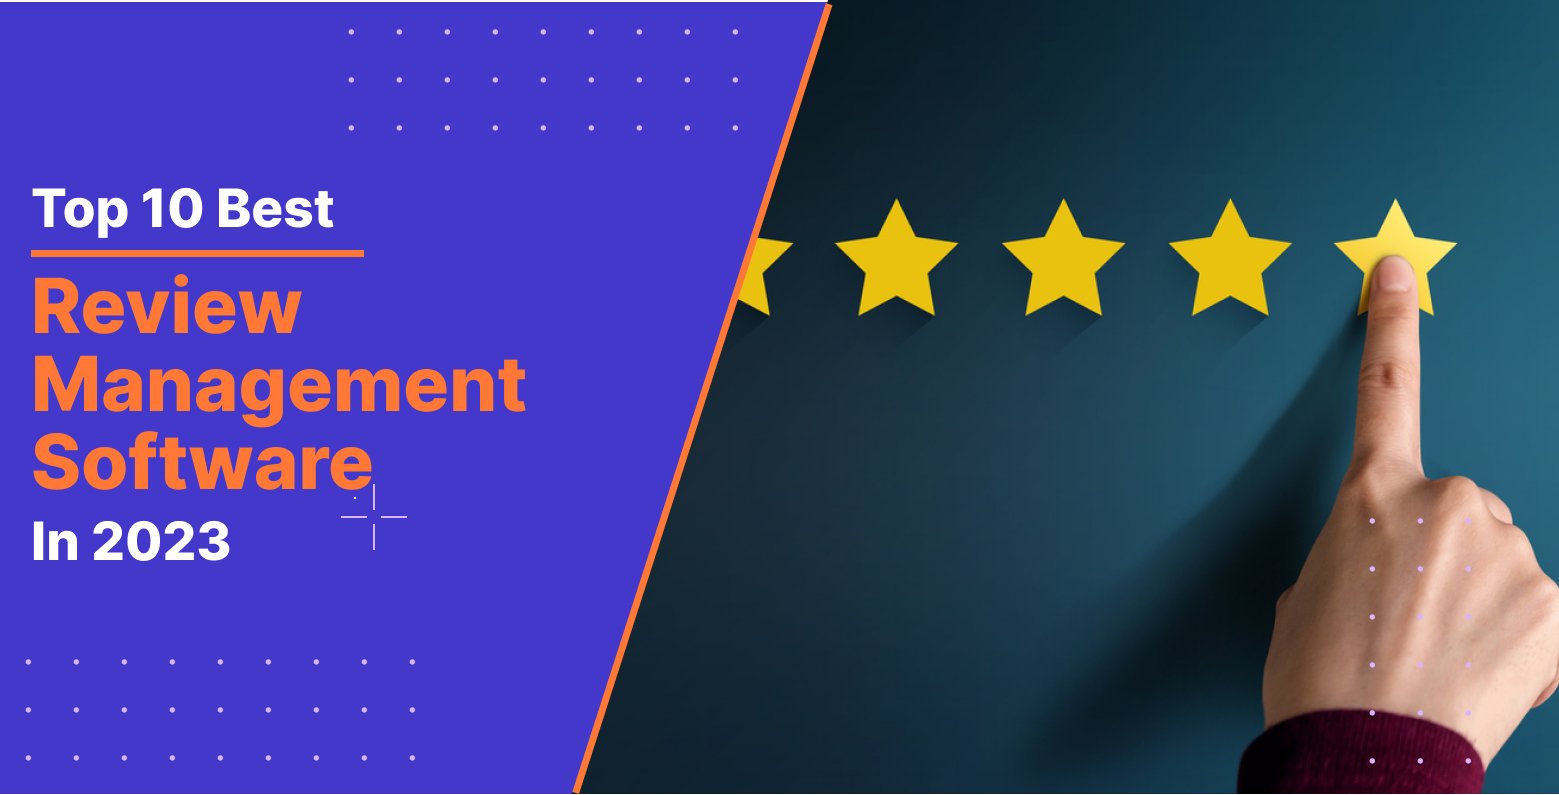 Top 10 Best Review Management Software In 2023